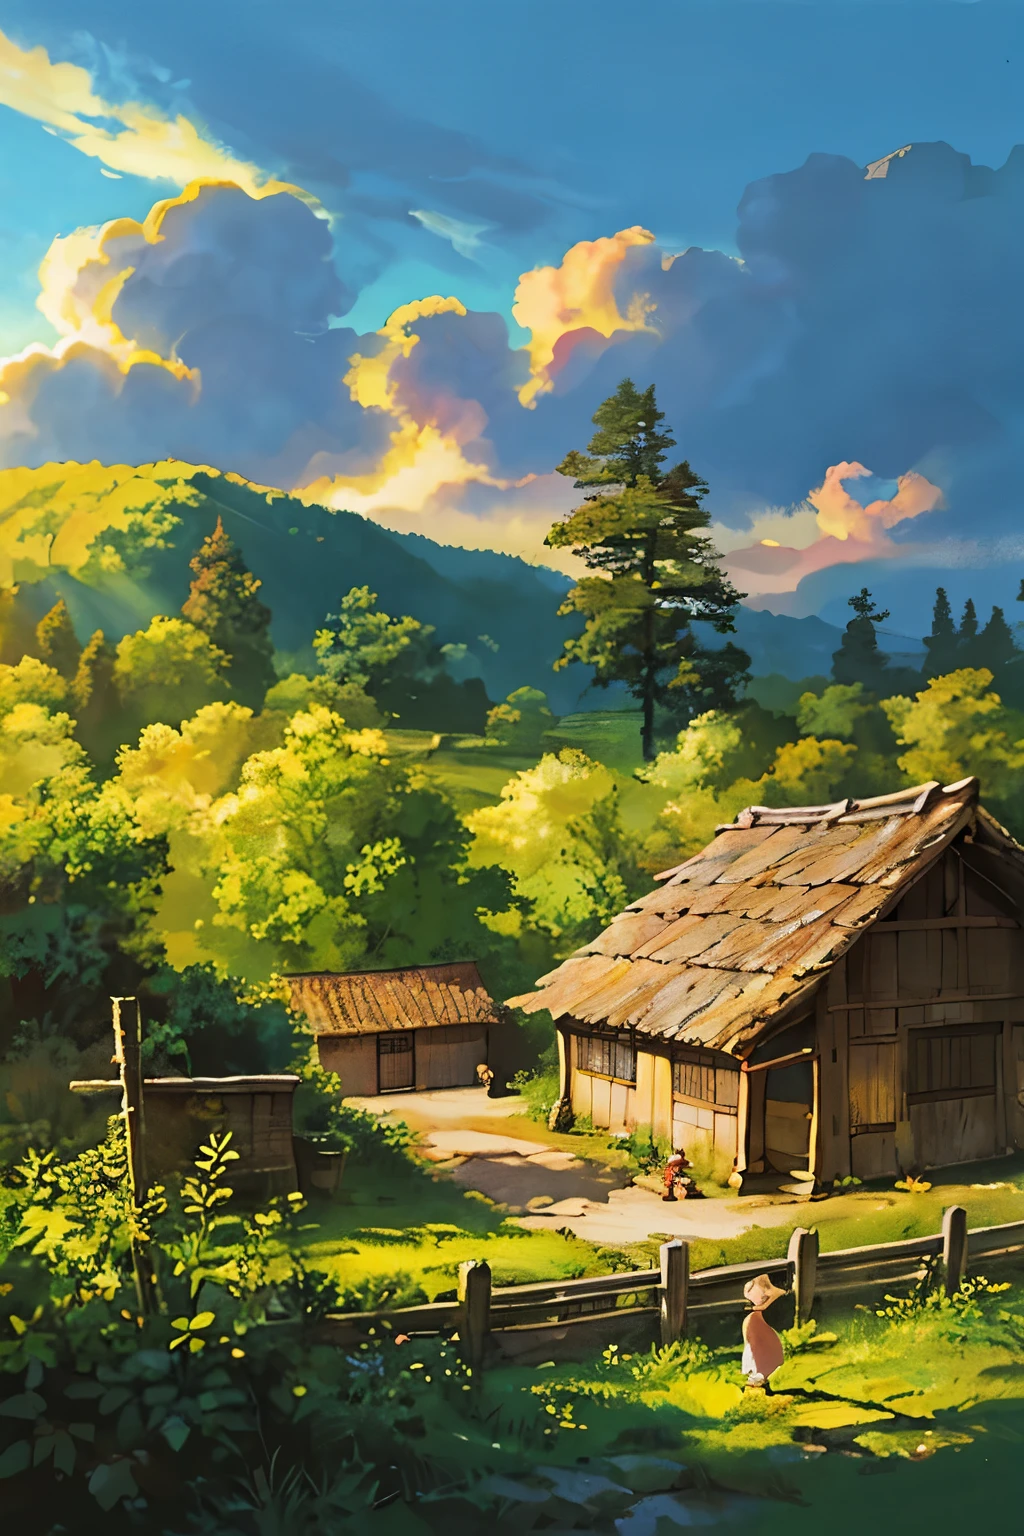 In an enchanting village inspired by Hayao Miyazaki's magical realism, the sun cast a golden glow, its rays piercing through the crystal-clear sky. Lush forests stretching far and wide framed the scenic landscape, their vibrant leafage dancing in the gentle breeze. Wafts of smoke ascended gracefully from the chimneys, adding a cozy warmth to the idyllic setting. Amidst this serene backdrop, the villagers went about their daily routines, their simple lives intertwined with the harmonious balance of nature. --ar 16:9 --s2 {A captivating scene filled with details, radiating a sense of nost